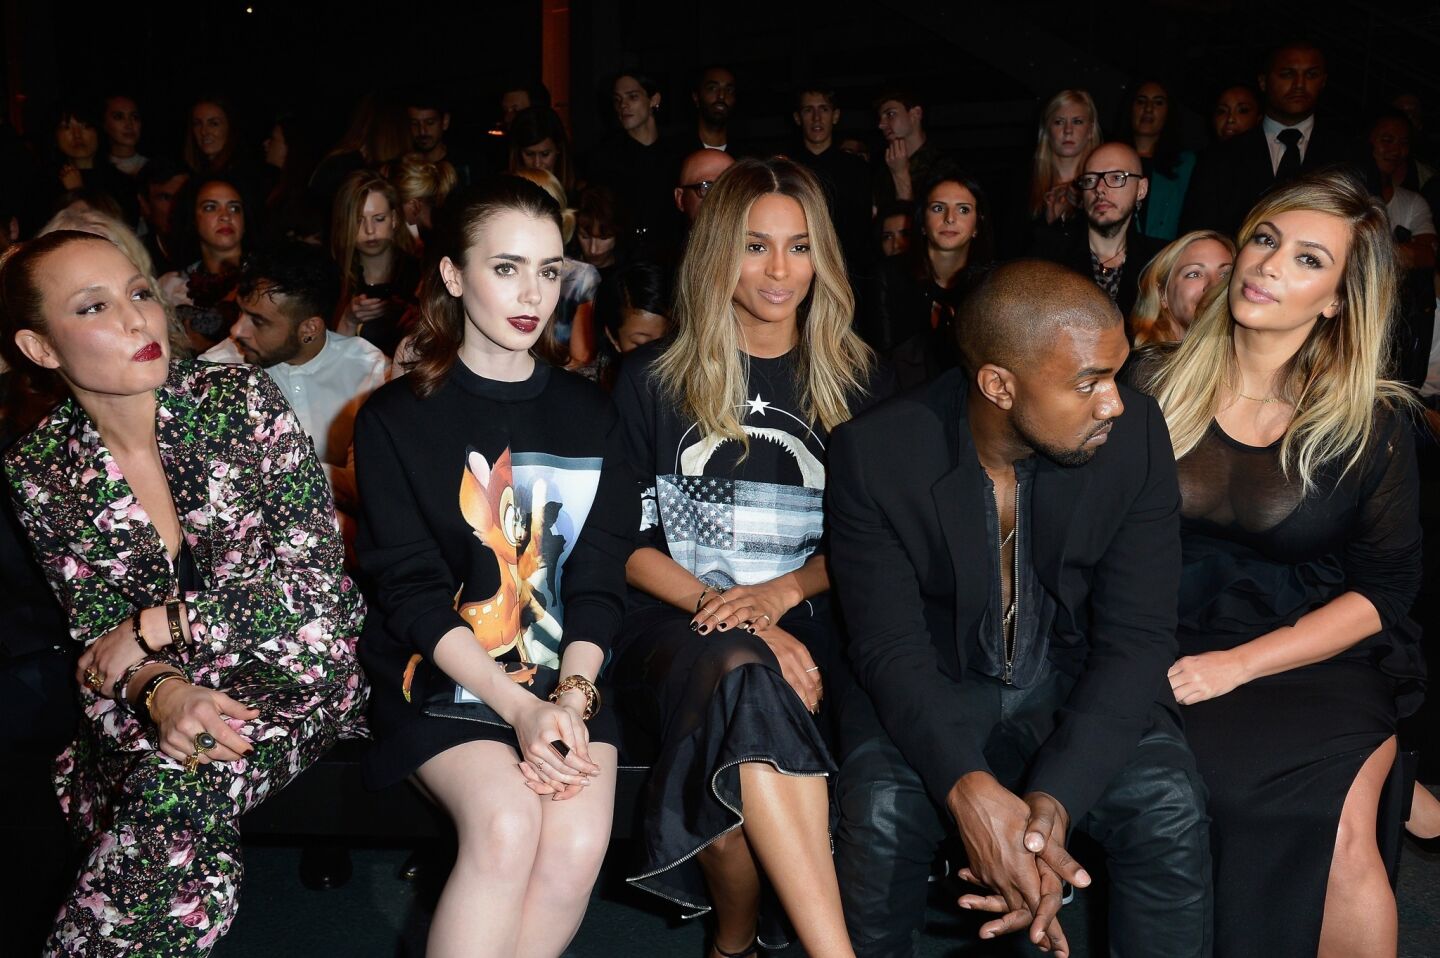 Actresses Noomi Rapace, Lily Collins, singer Ciara, Kanye West and Kim Kardashian attend the Givenchy show during Paris Fashion Week.